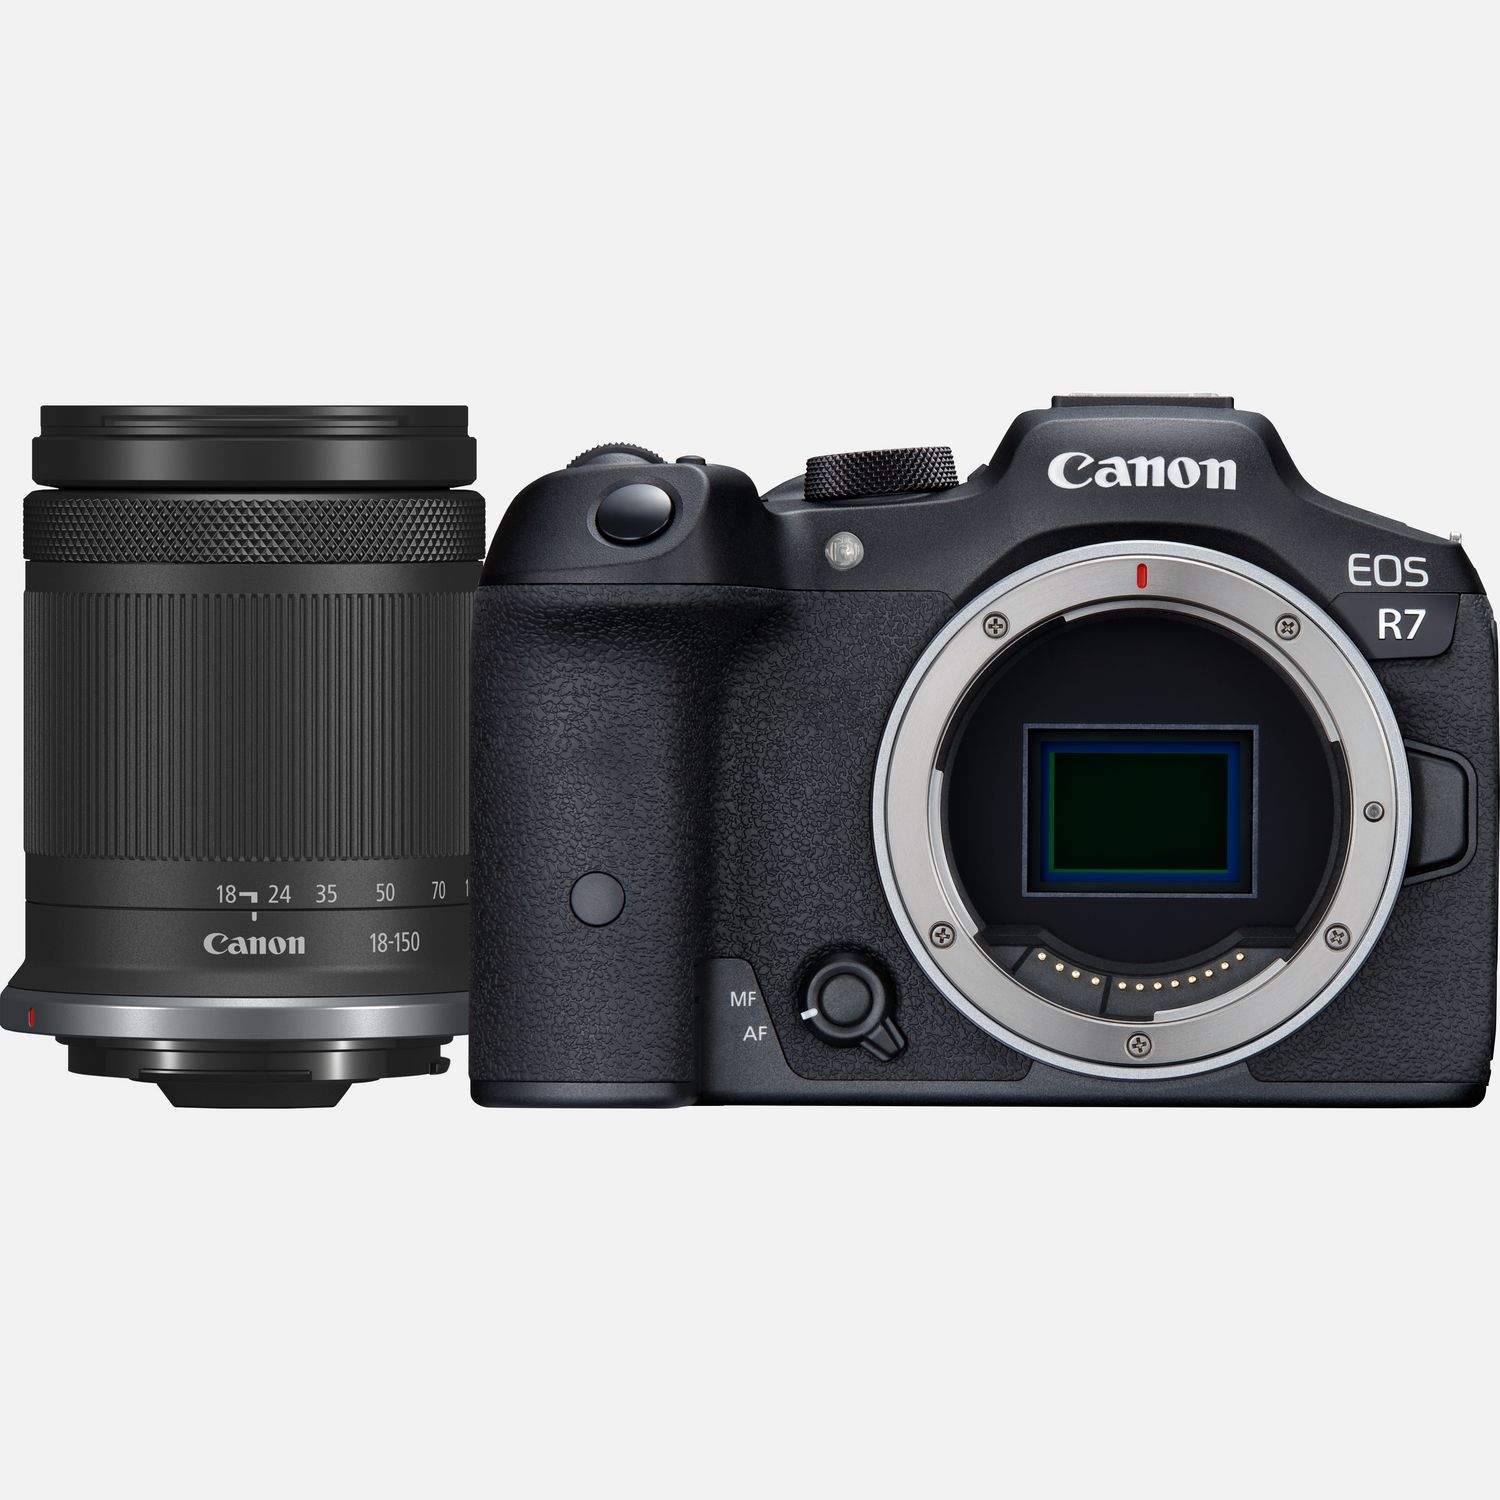 Canon EOS R7: price, specs, release date revealed - Camera Jabber